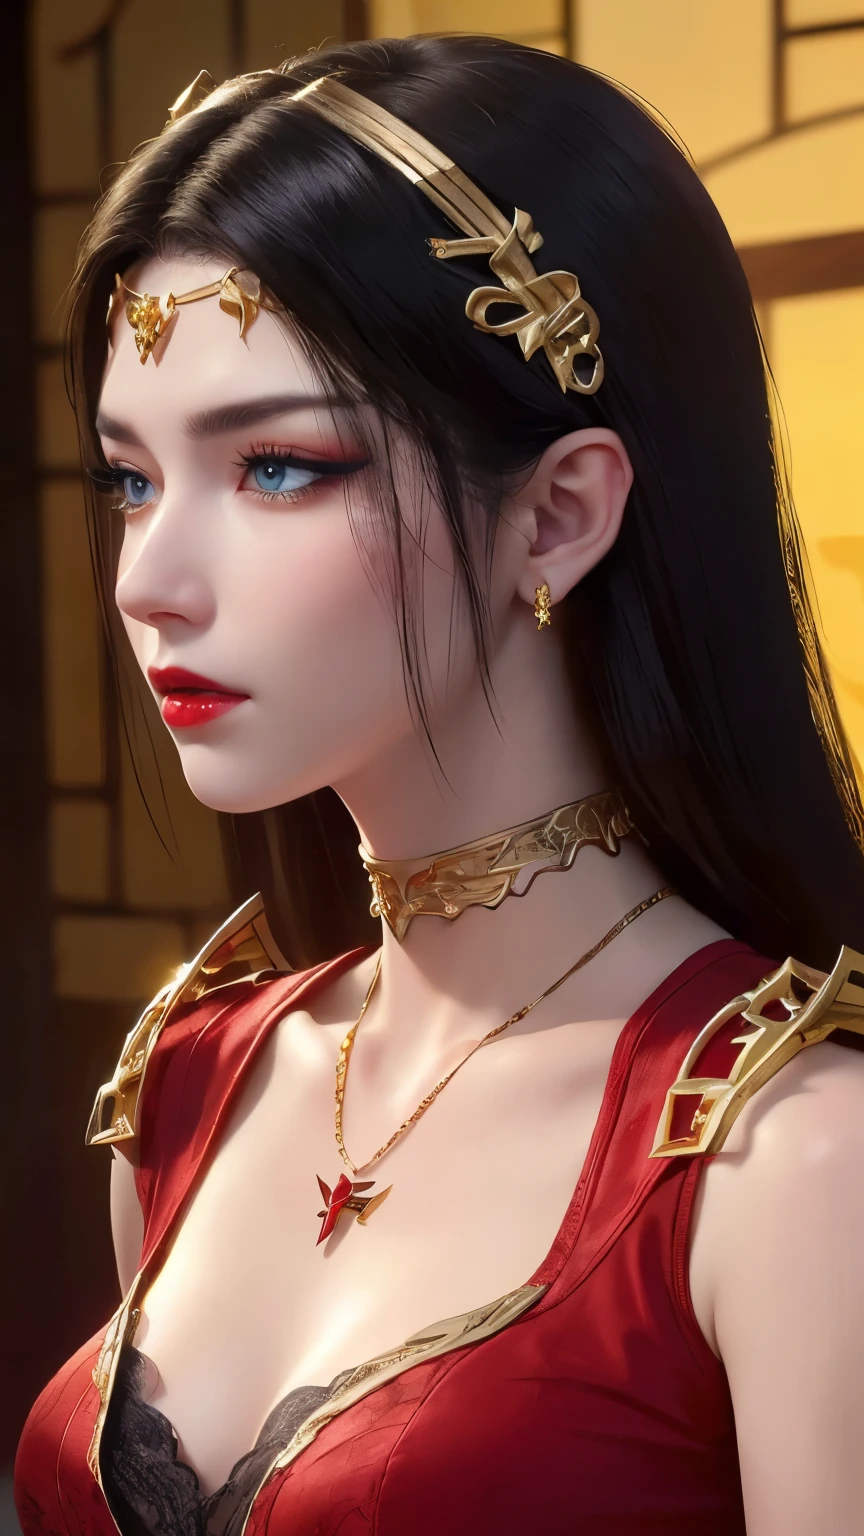 ((midynight, Need, 8K, tmasterpiece:1.3)),  very beautiful queen,  ultra-detailed face, highly detailed lips, detailed eyes, double eyelid. ((Make-up face. Red lipstick)), long black hair. jewelry intricately made of precious stones and beautiful hair, (((wearing a 24k gold lace necklace:1.4))), Super cute little face, very beautiful face, thin eyebrows, flawless beautiful face, ((black pupil)), very beautiful eyes, ((platinum blue eyes)), beautiful and detailed makeup, wet eye makeup, eyelashes, sharp nose, earrings,

((wearing a traditional red hanfu with subtle black patterns)). Also show your ears. In front of the camera. Ear texture. Ear hole details. Realistic. Close-up Shot of Ear. At close range. Also show your ears. In front of the camera. Ear texture. Ear hole details. Realistic. Close-up Shot of Ear. At close range.  shot from the back angle. shot from the back angle. in front of the make-up mirror